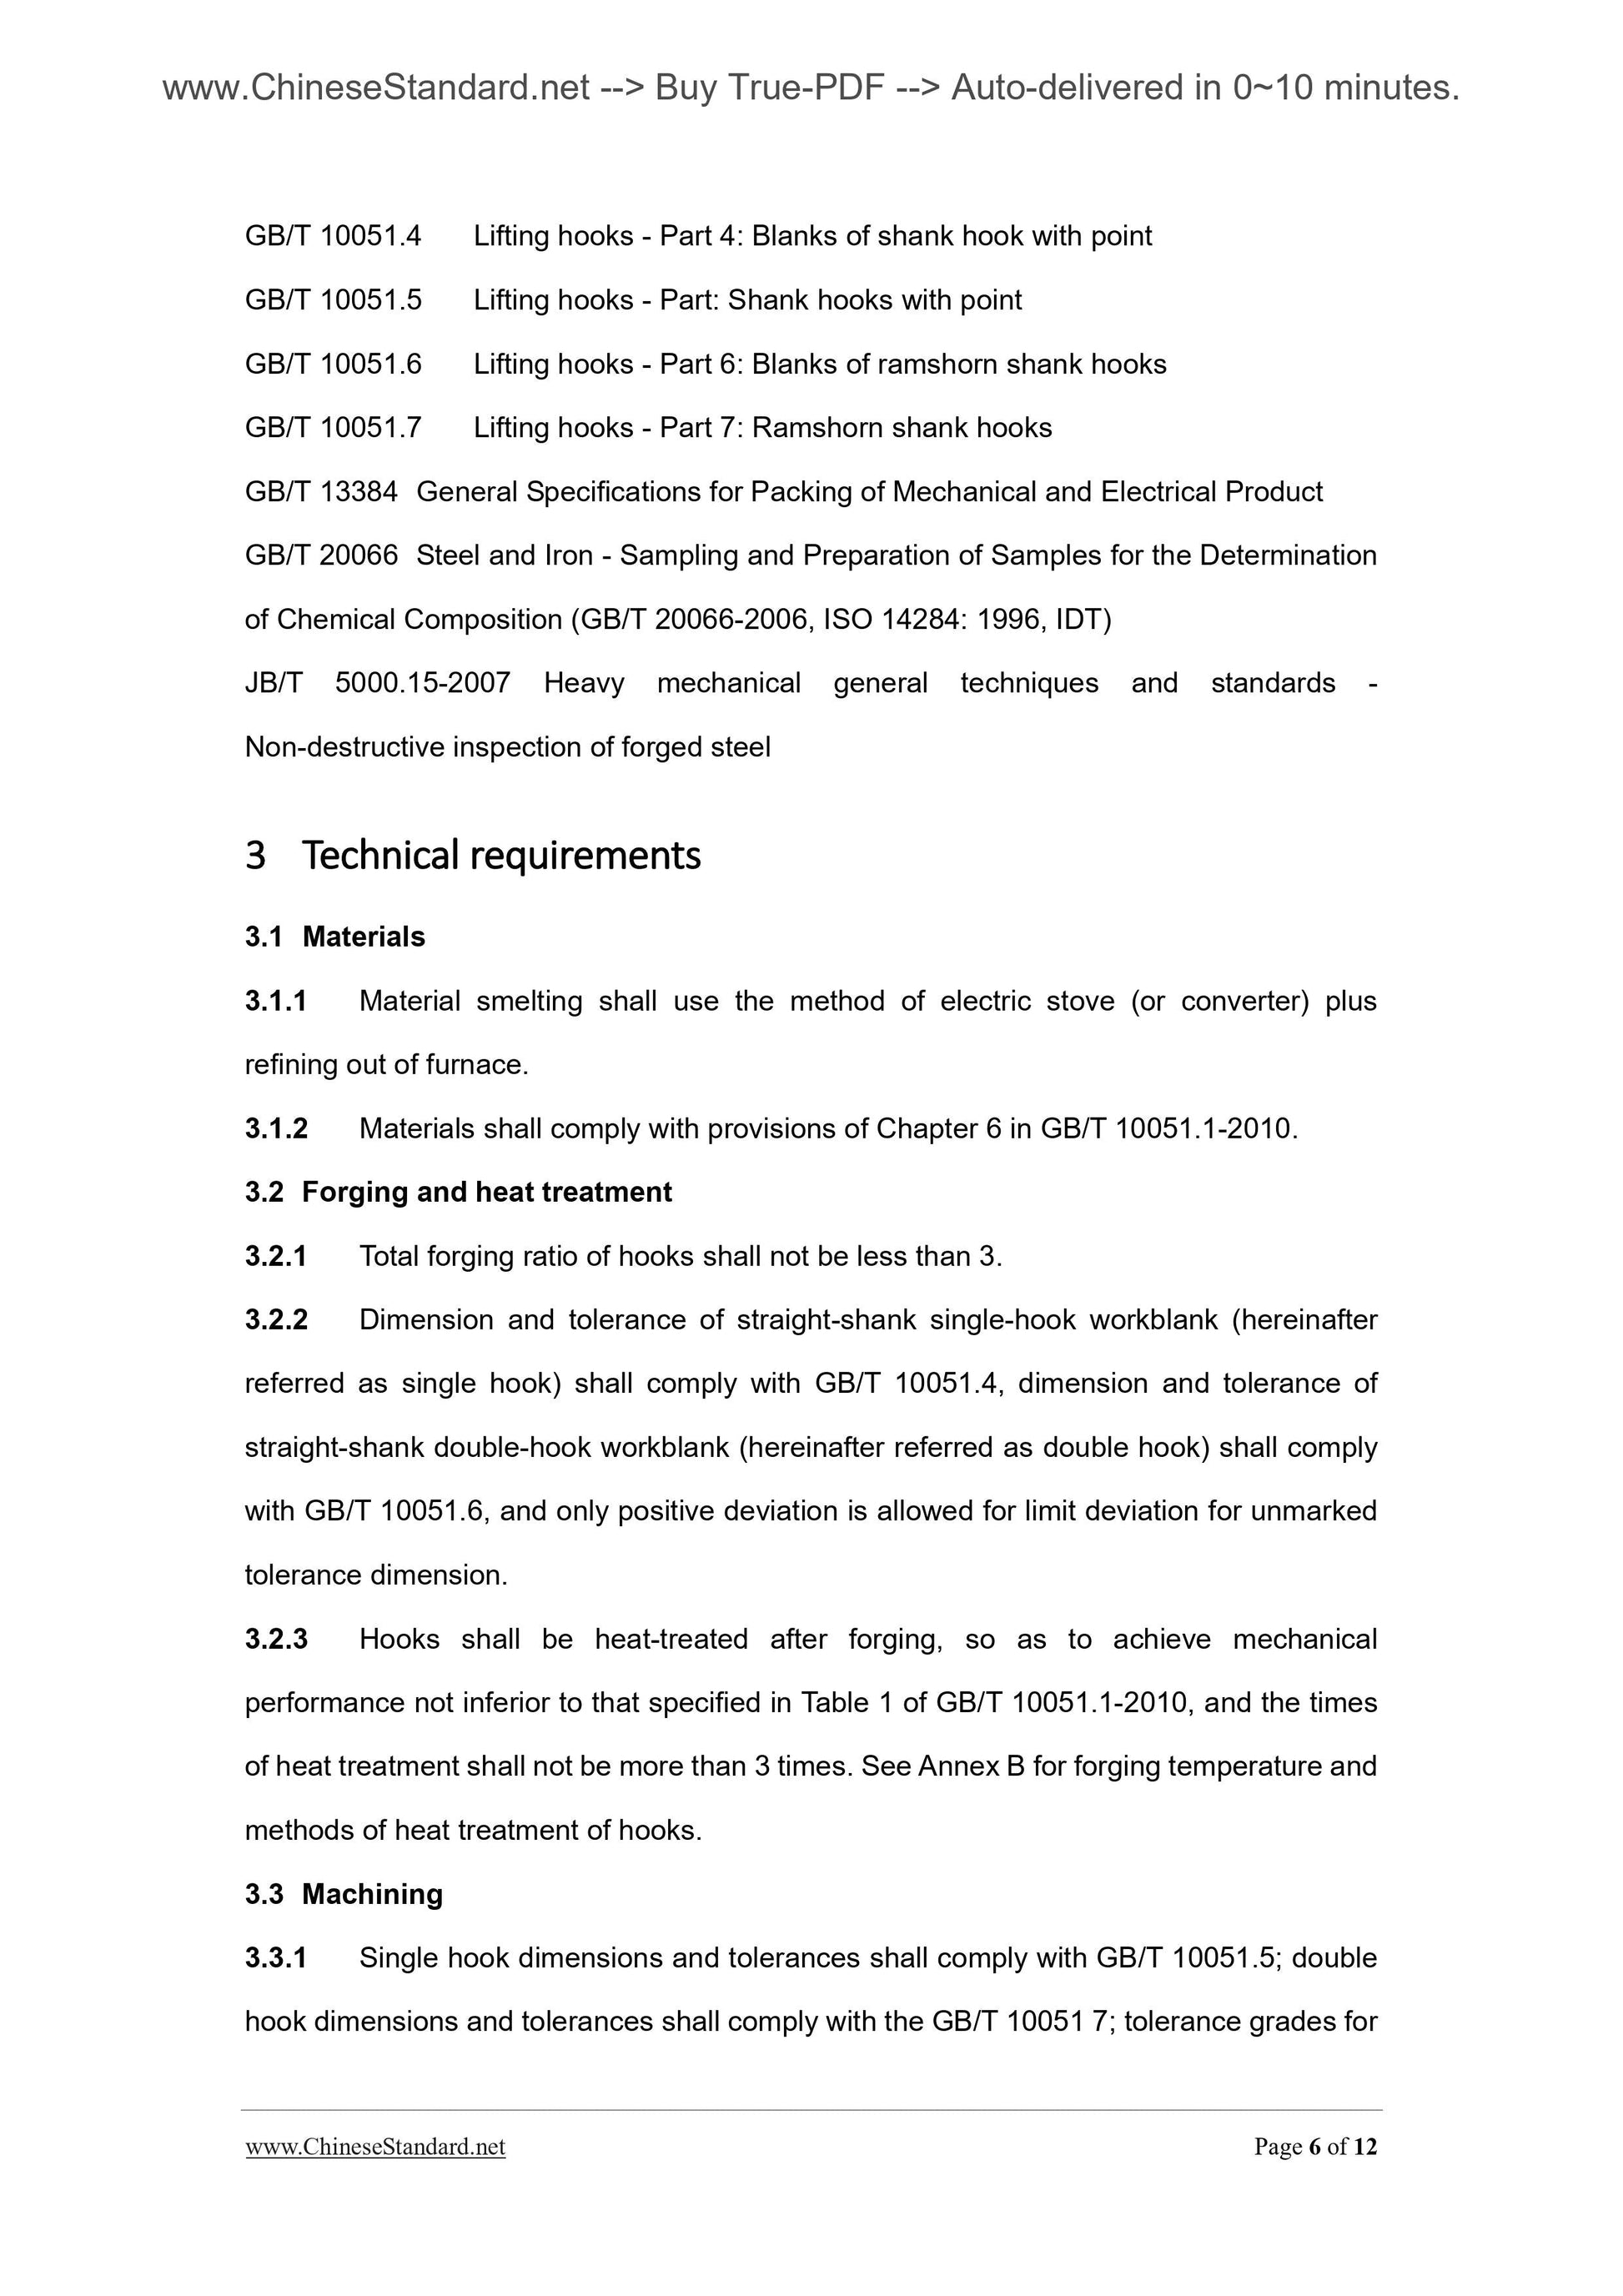 GB/T 10051.2-2010 Page 6